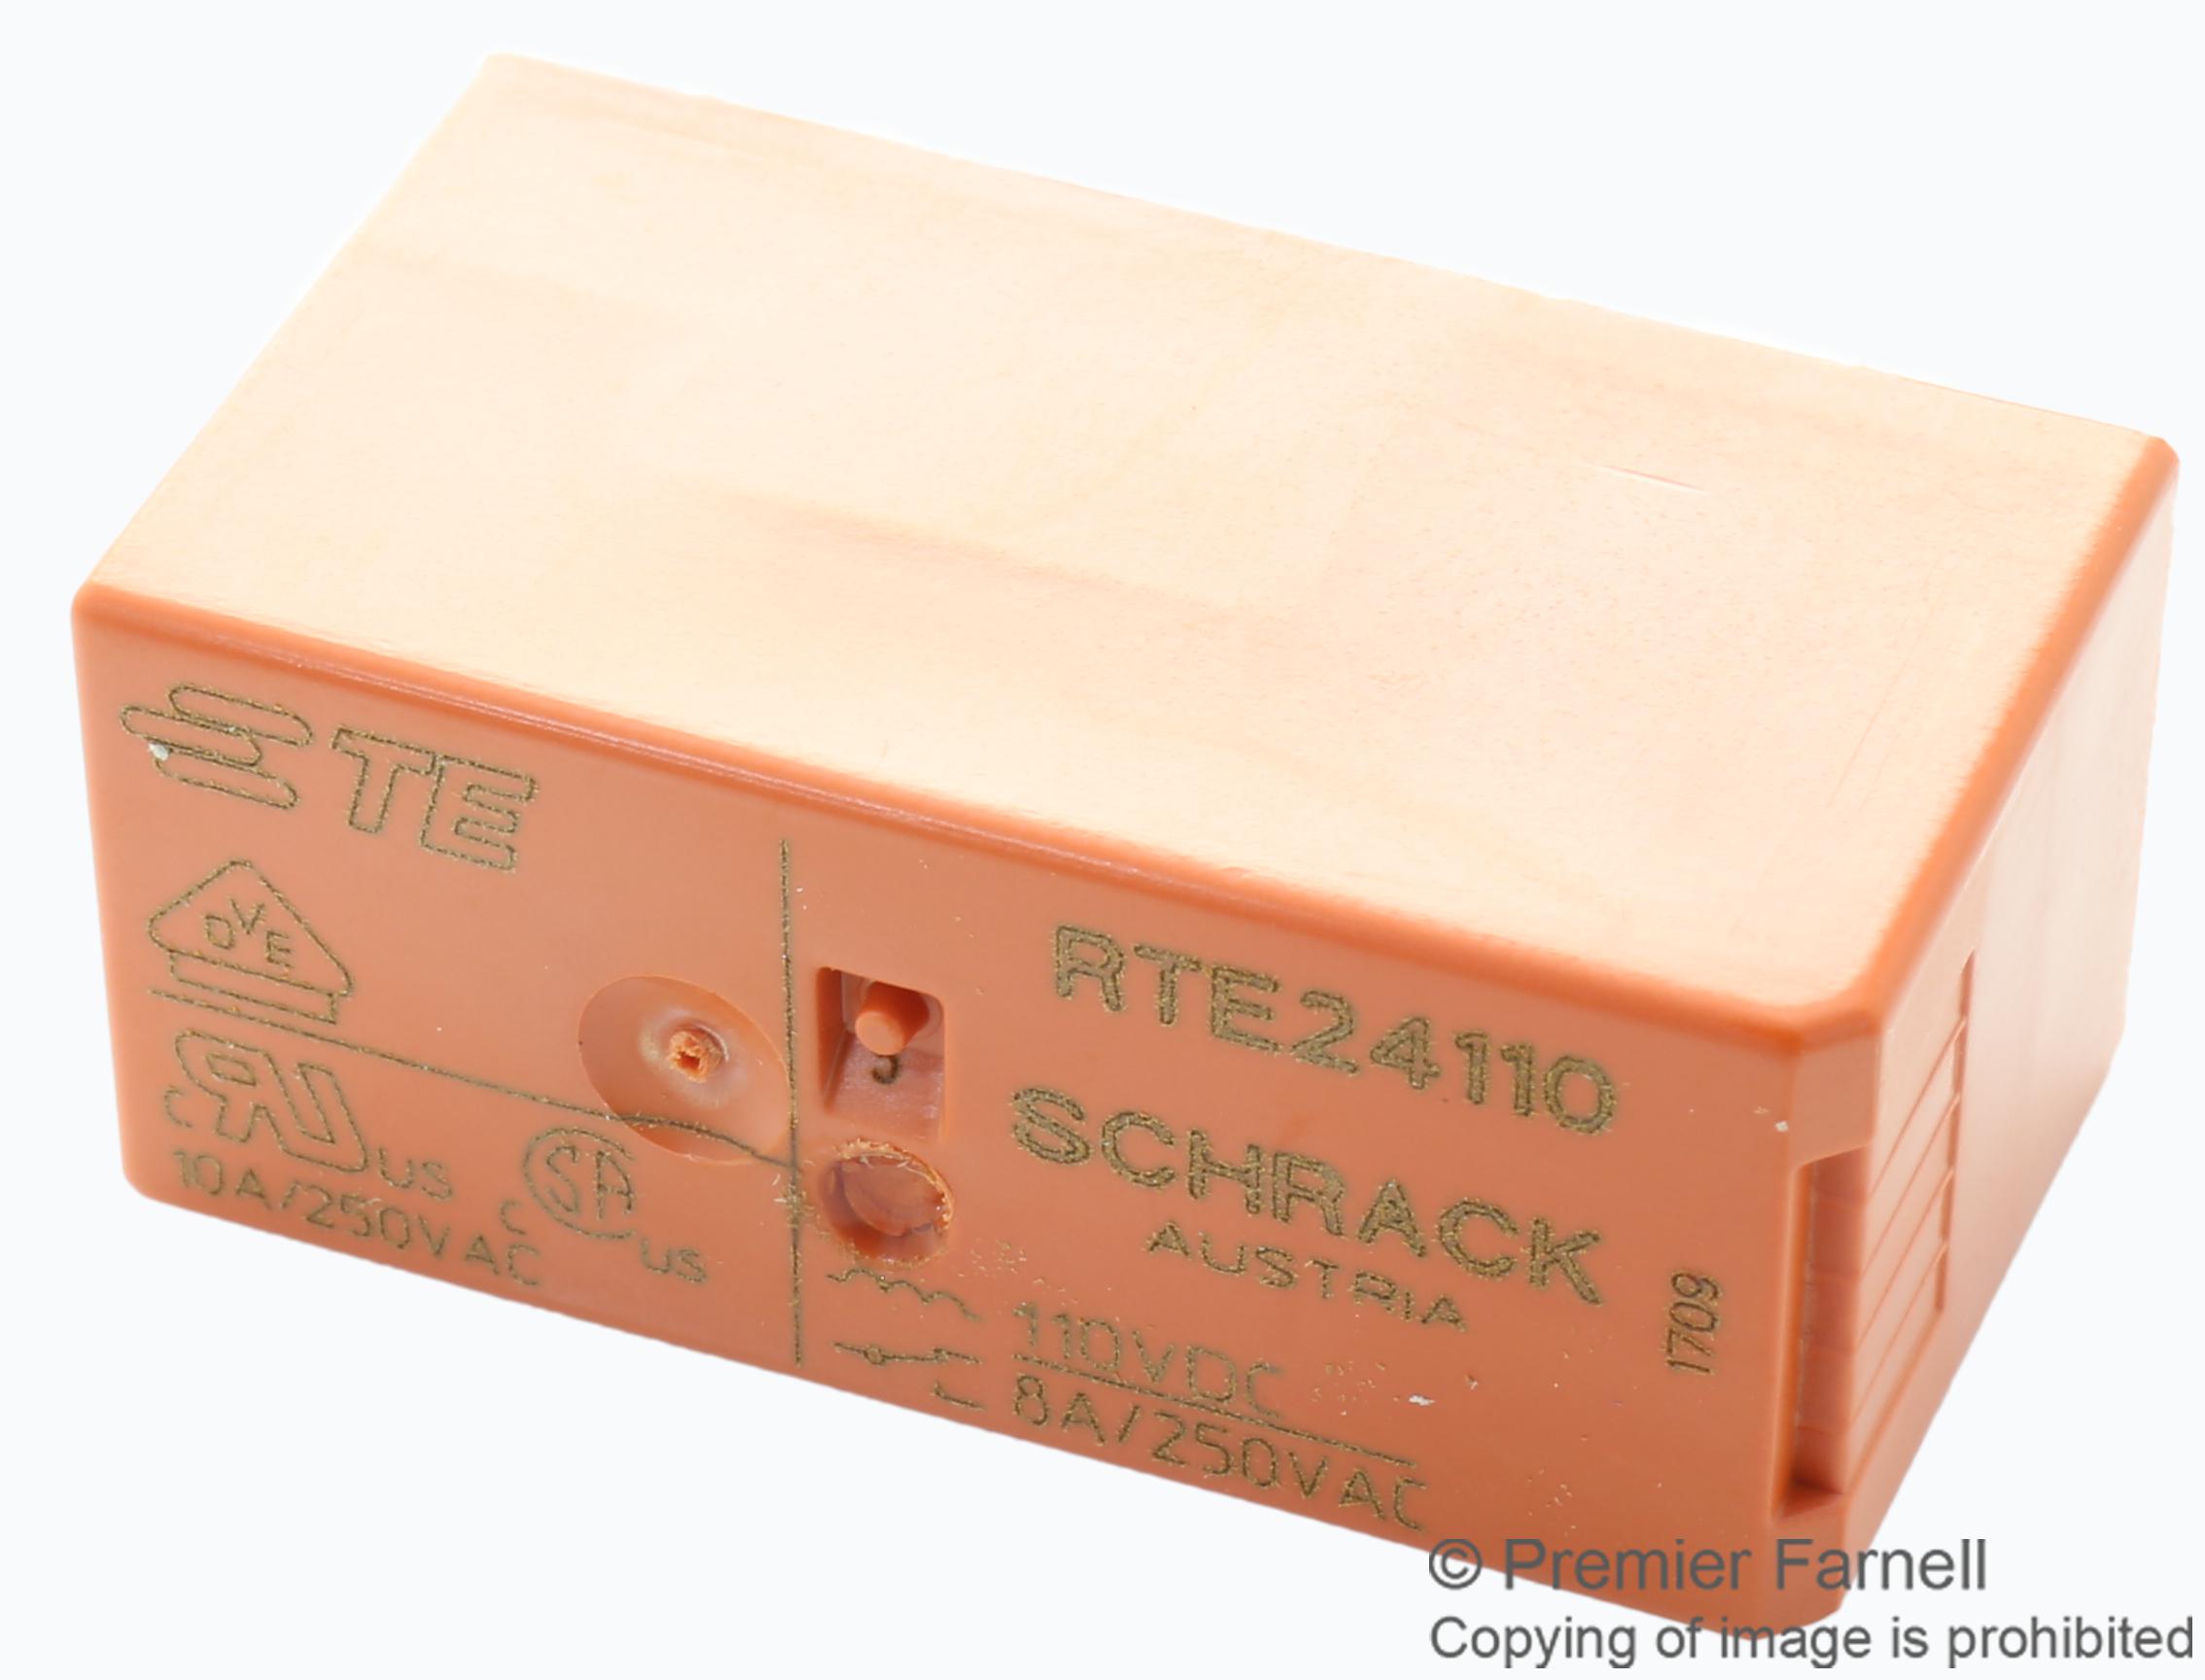 RTE24110.. POWER RELAY, DPDT, 10A, 250VAC, TH SCHRACK - TE CONNECTIVITY